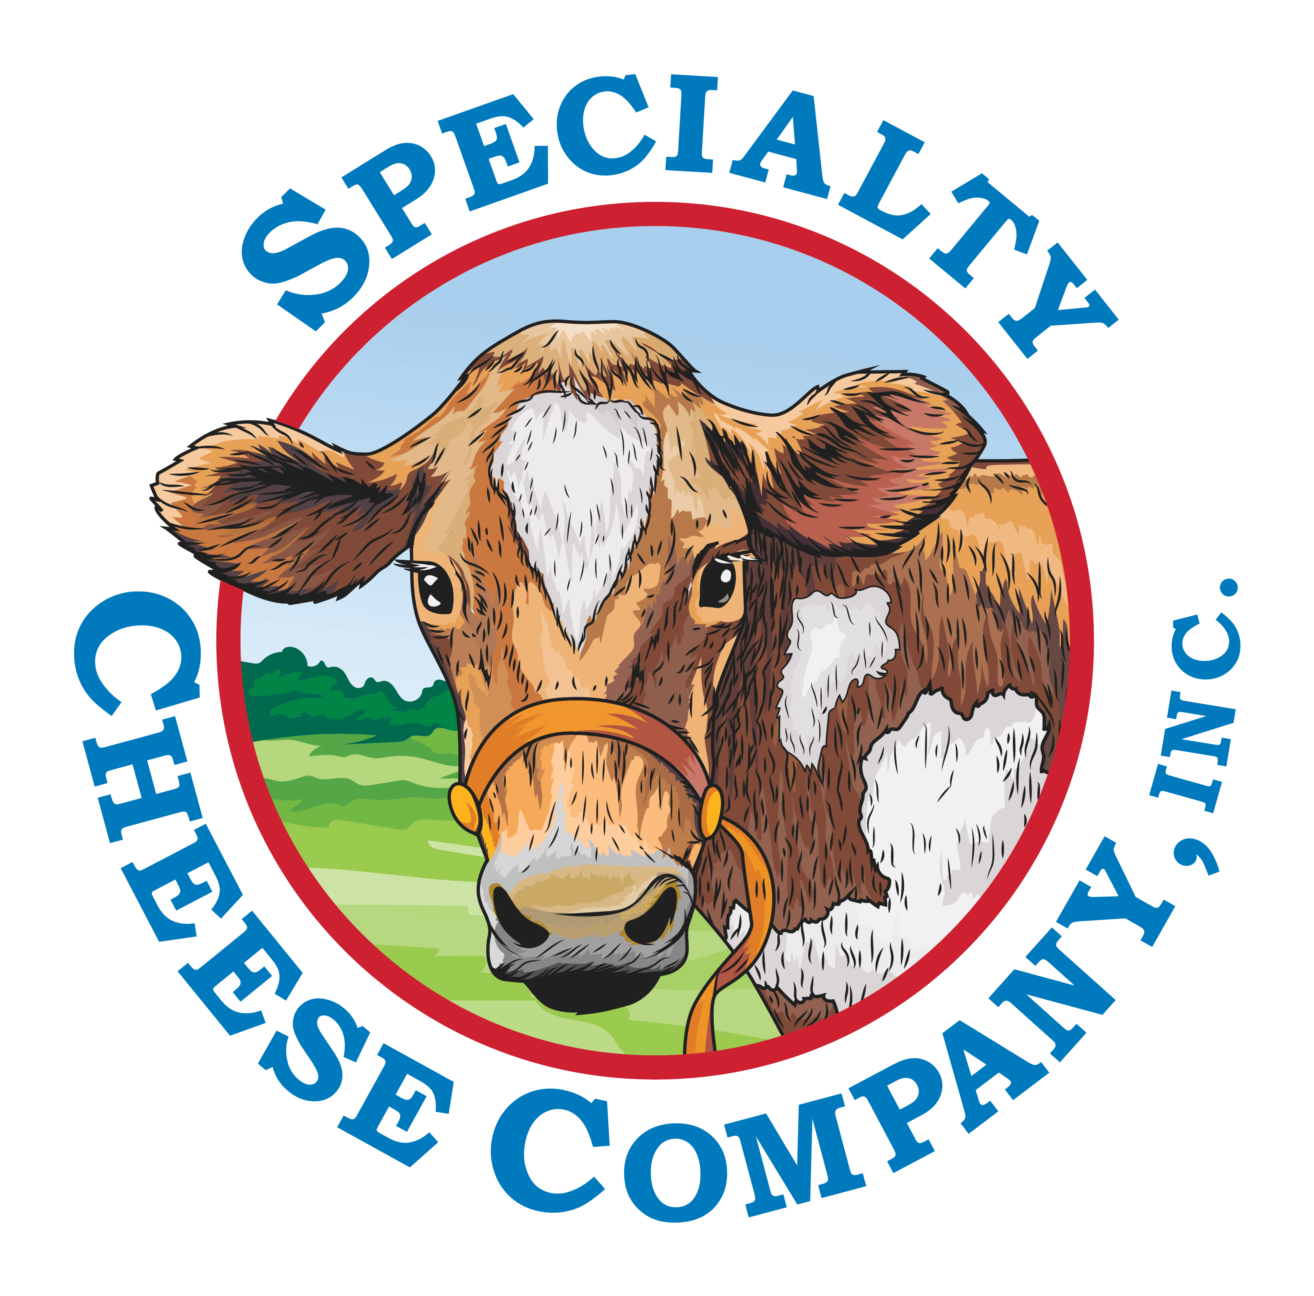 Specialty Cheese logo